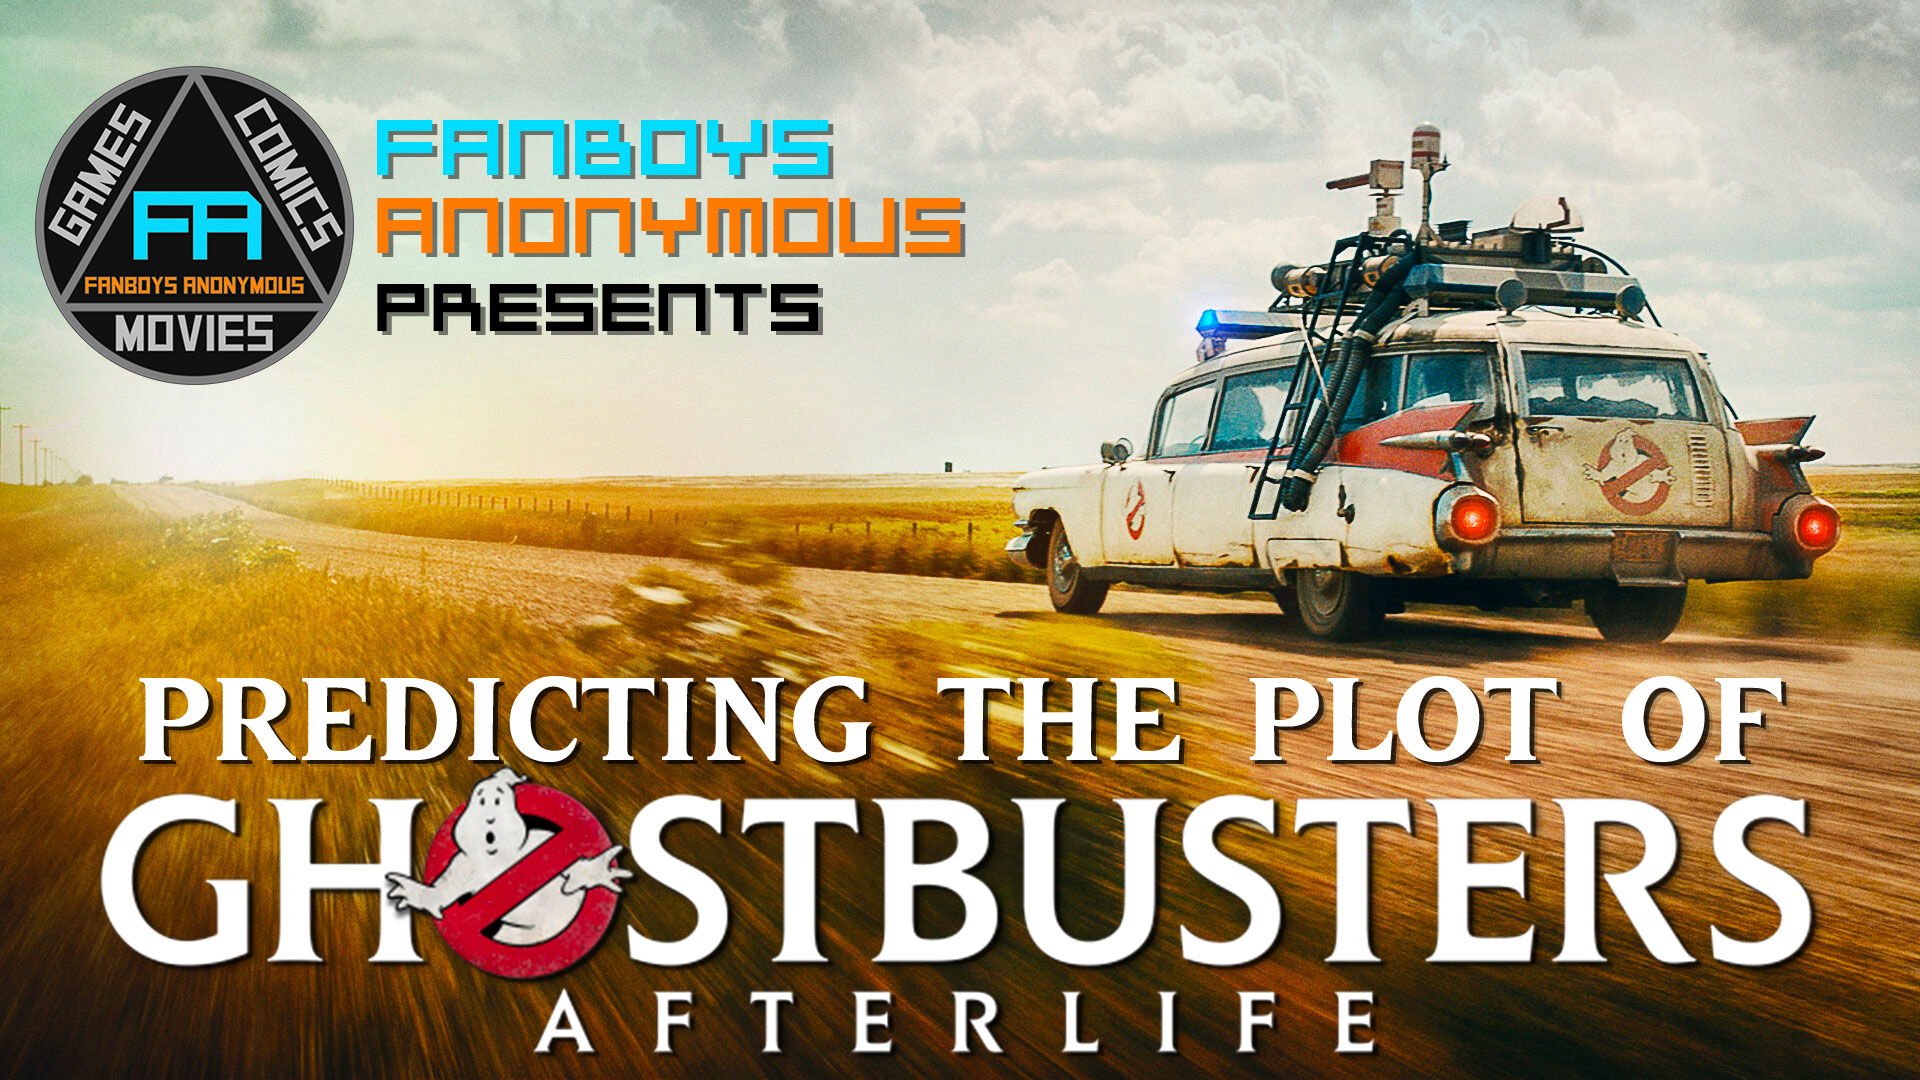 What is the plot of Ghostbusters Afterlife film?